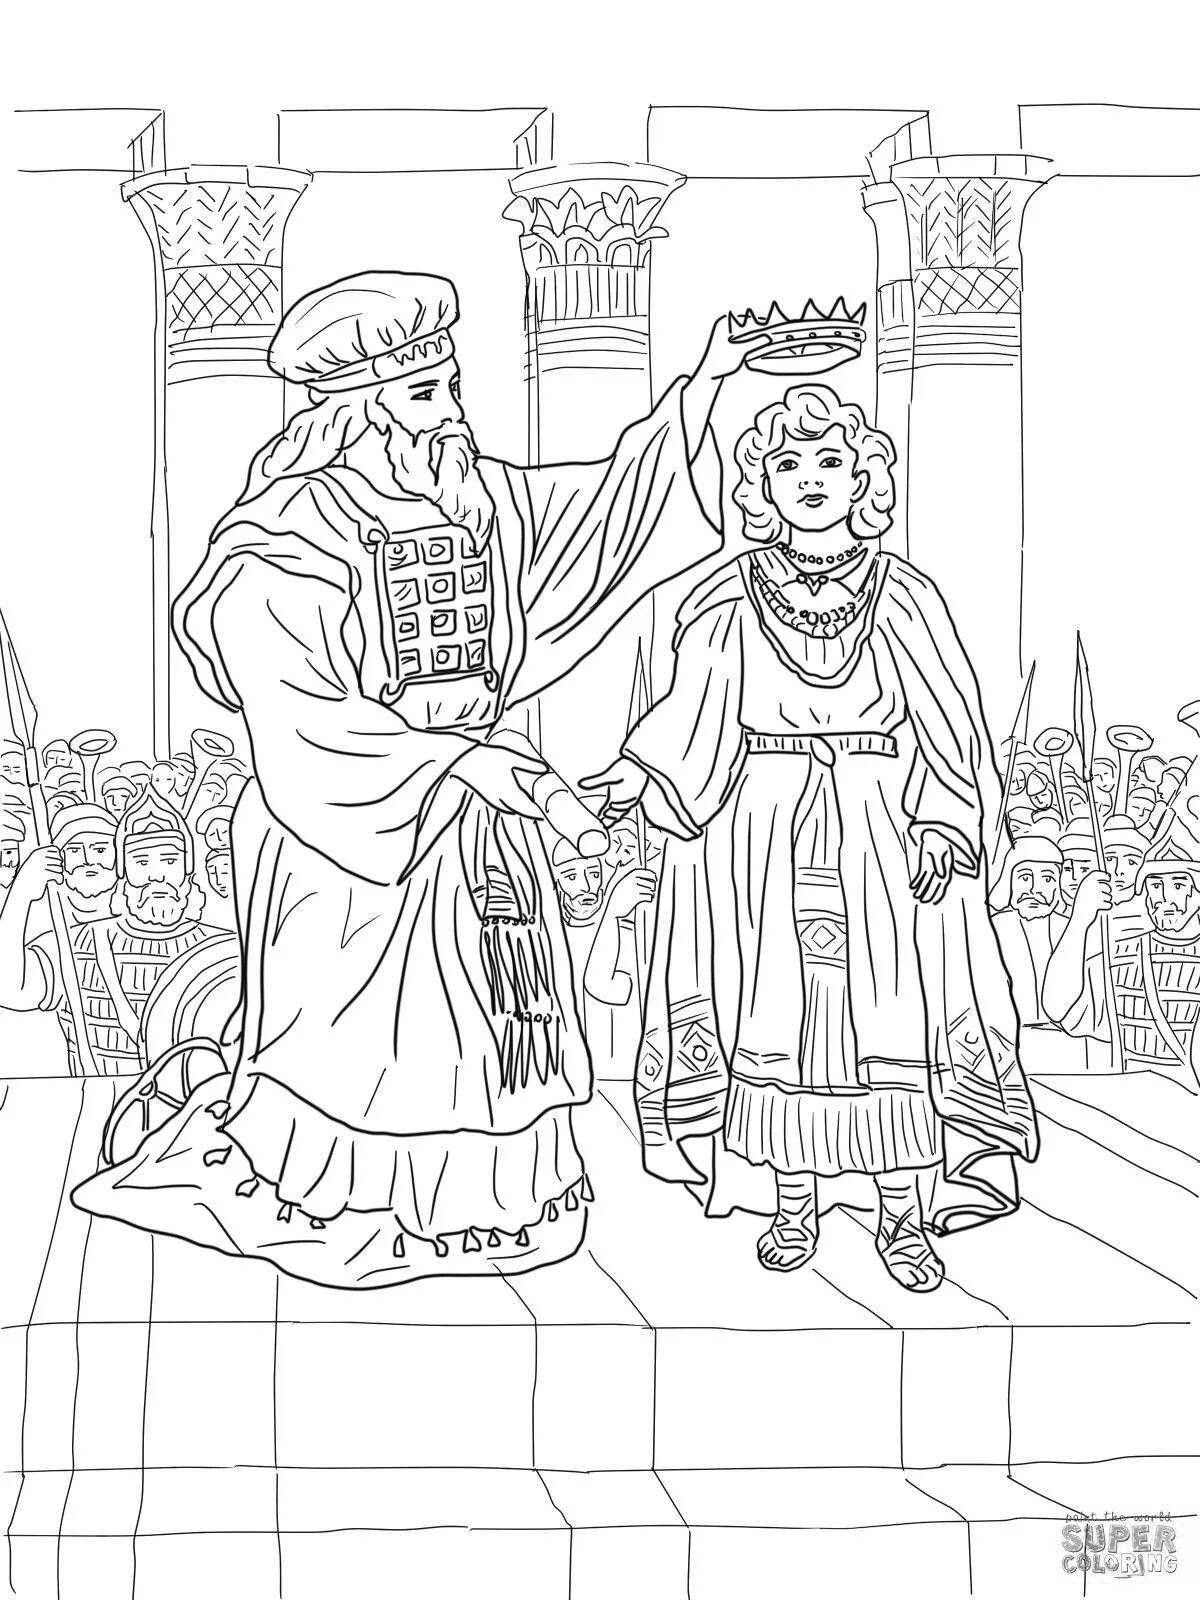 Outstanding historical coloring book for kids